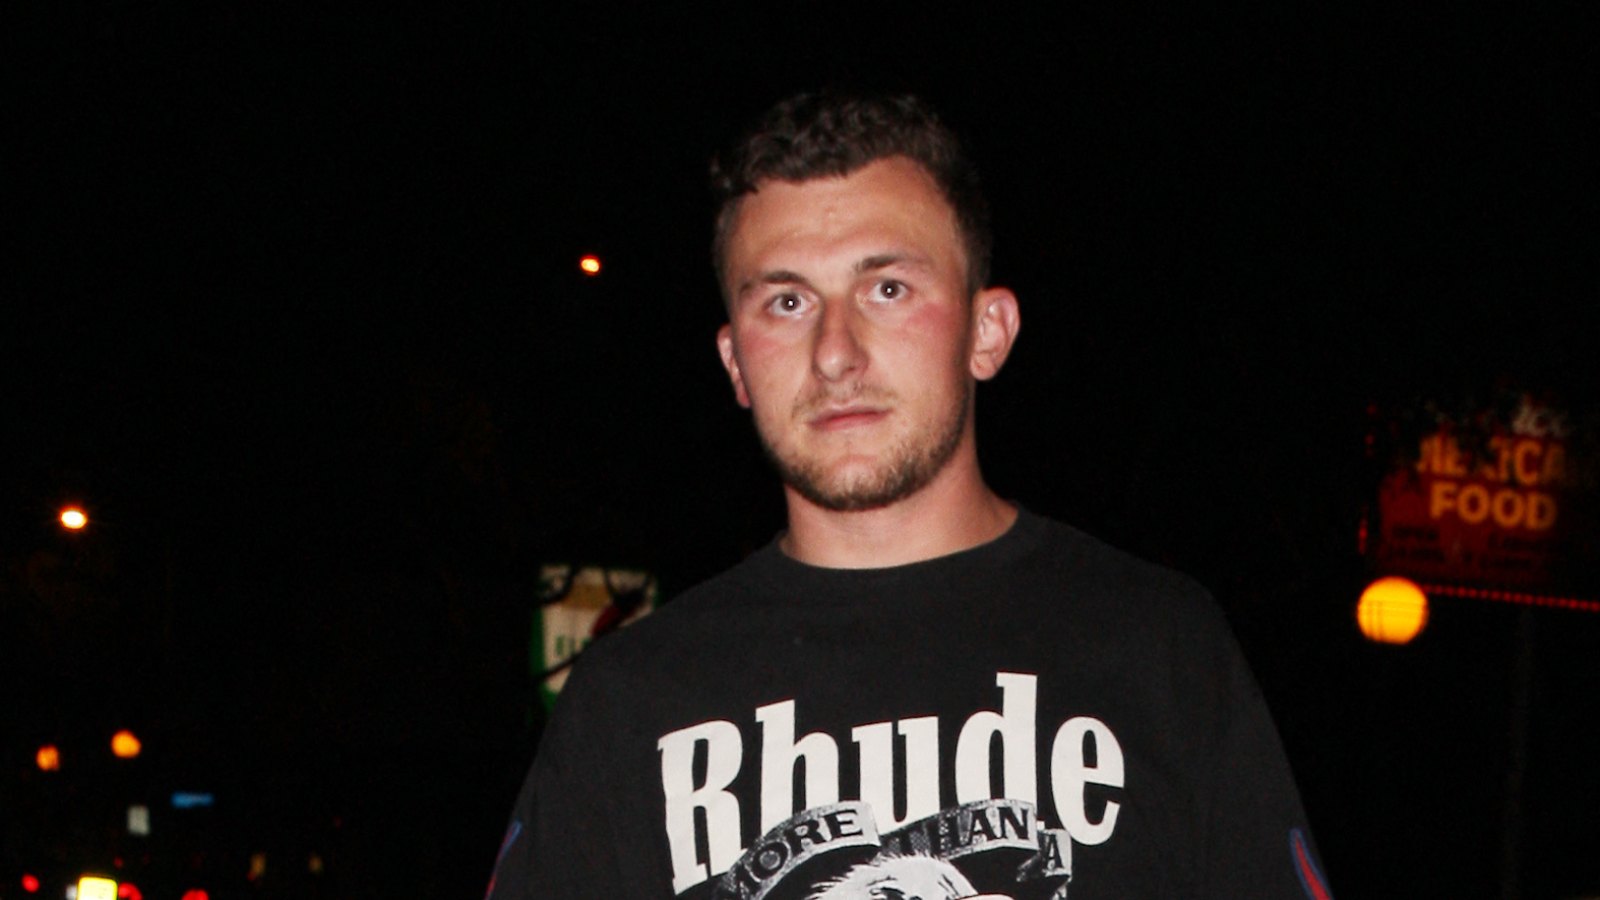 Johnny Manziel Planned to Take His Life After -5 Million Bender